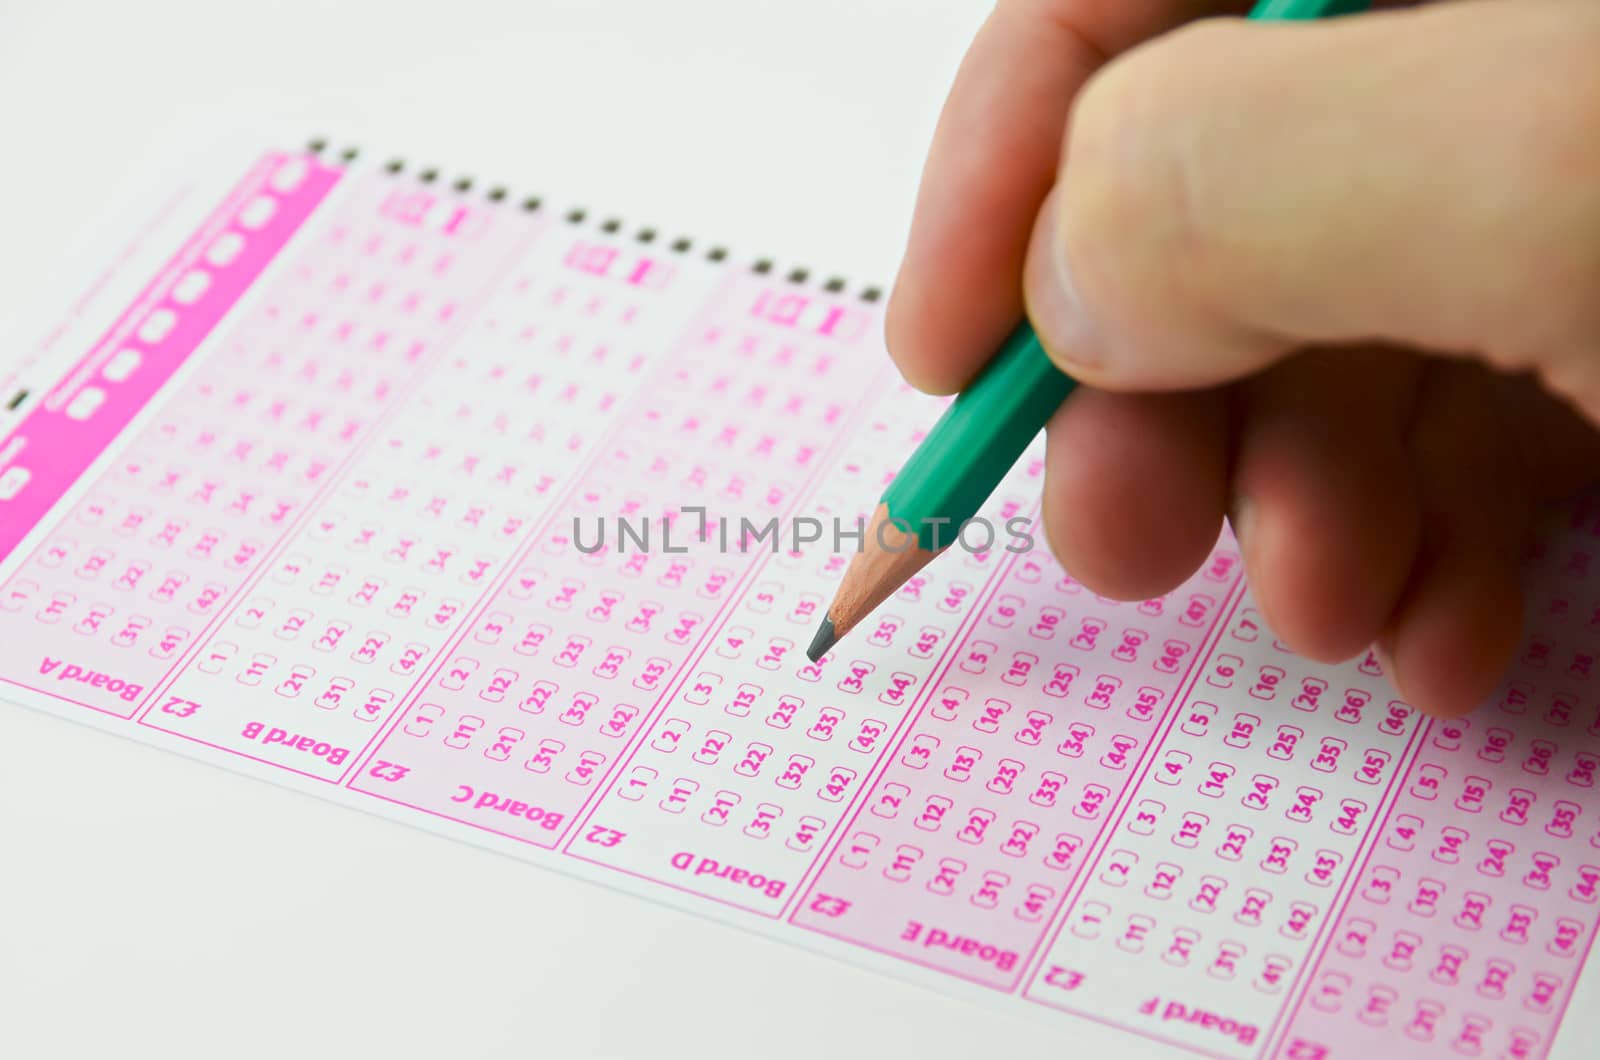 Close-up marking number on lottery ticket with pencil


